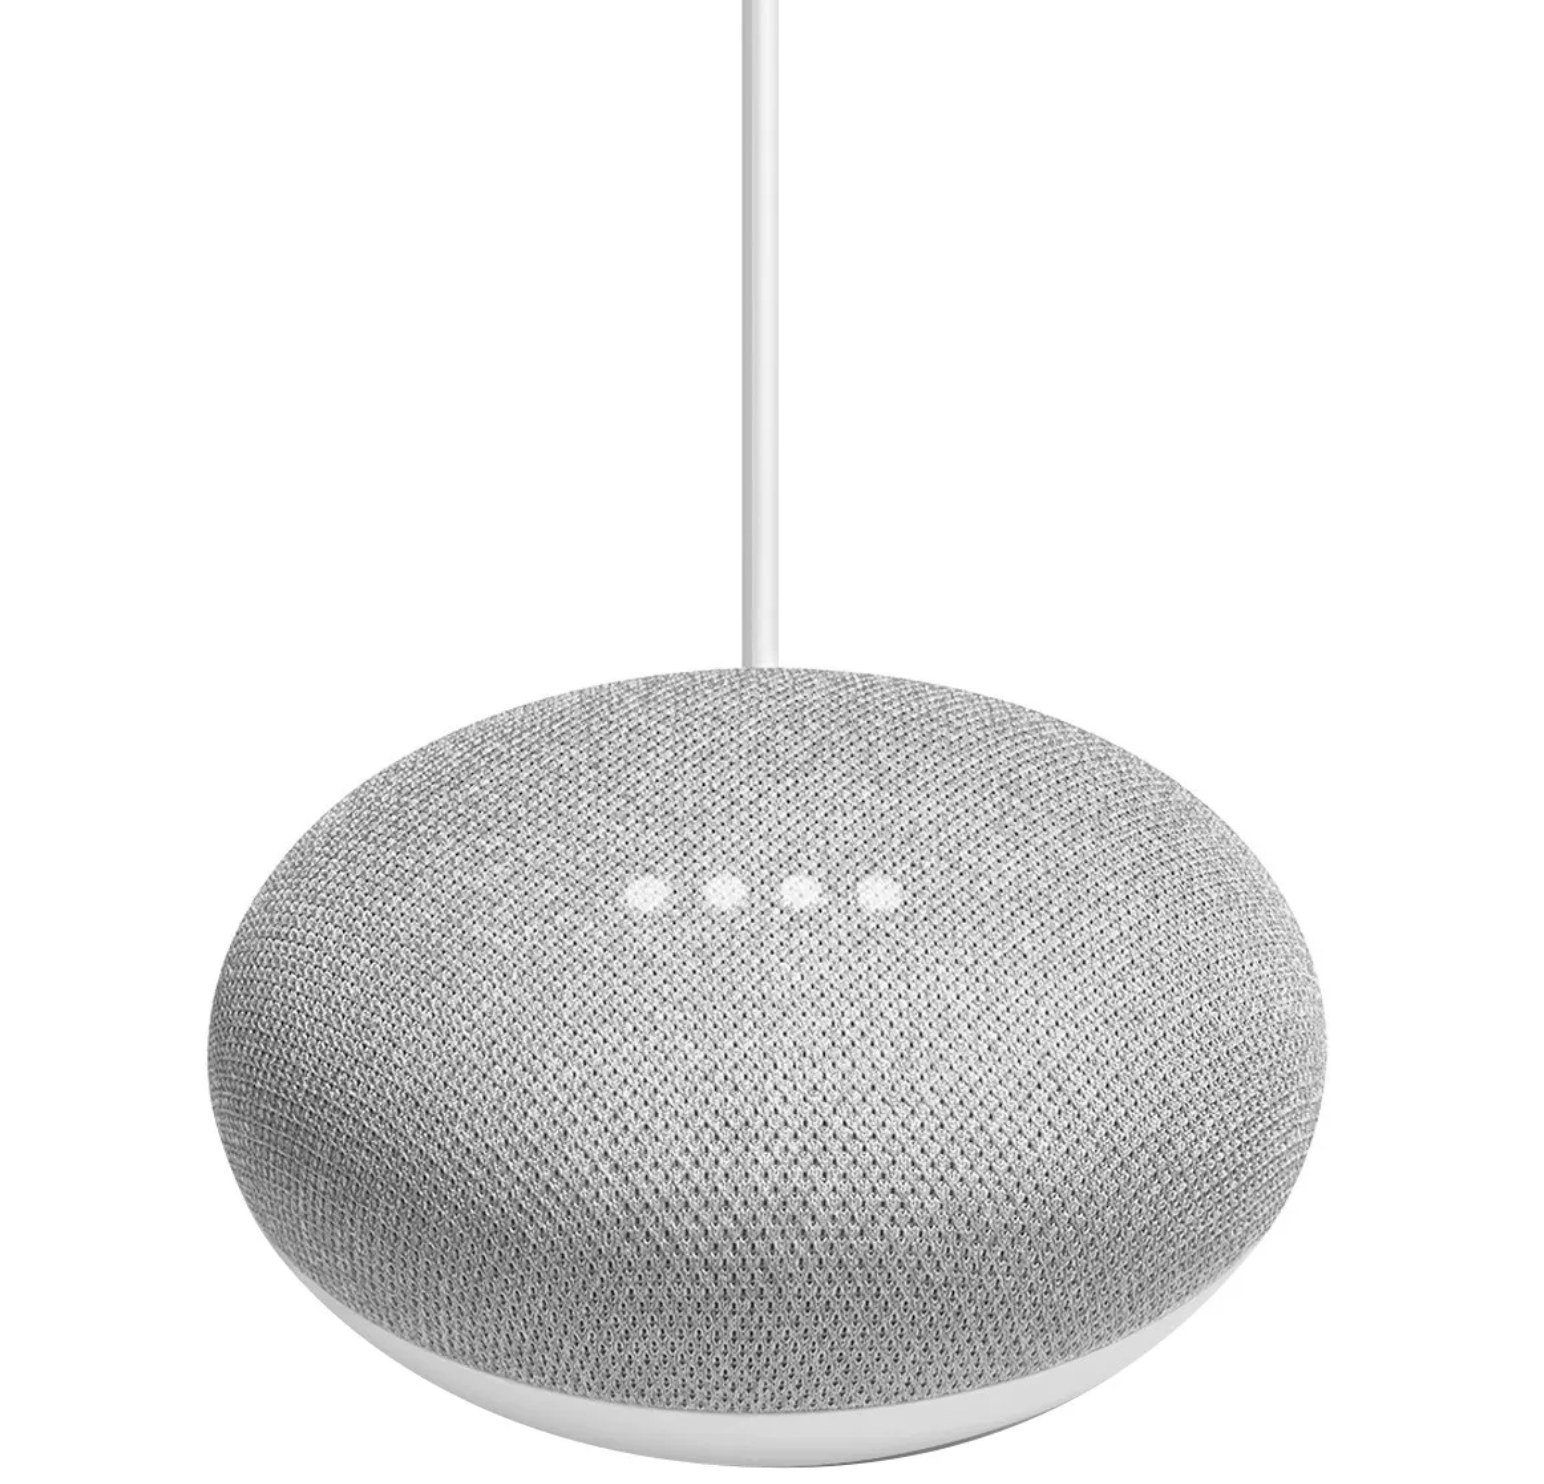 A grey Google Home Mini with 4 LED lights lit up in the center